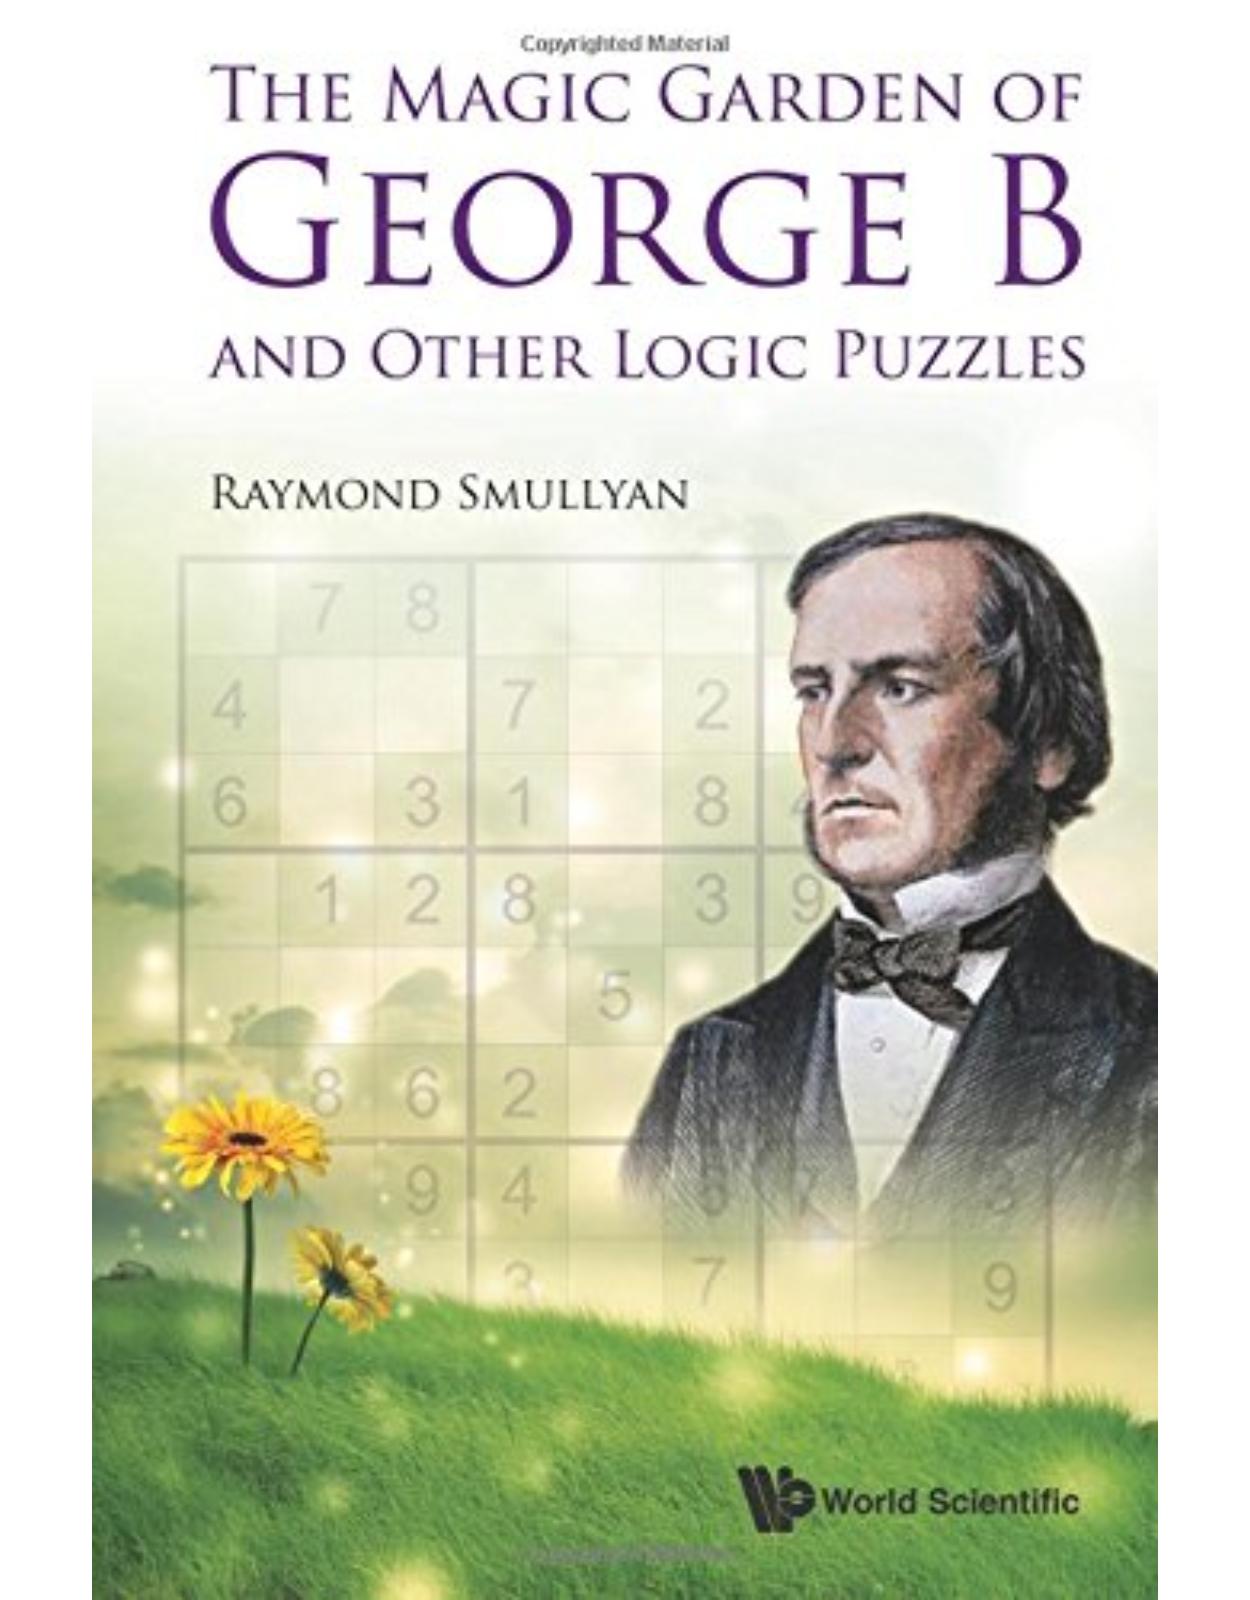 The Magic Garden Of George B And Other Logic Puzzles